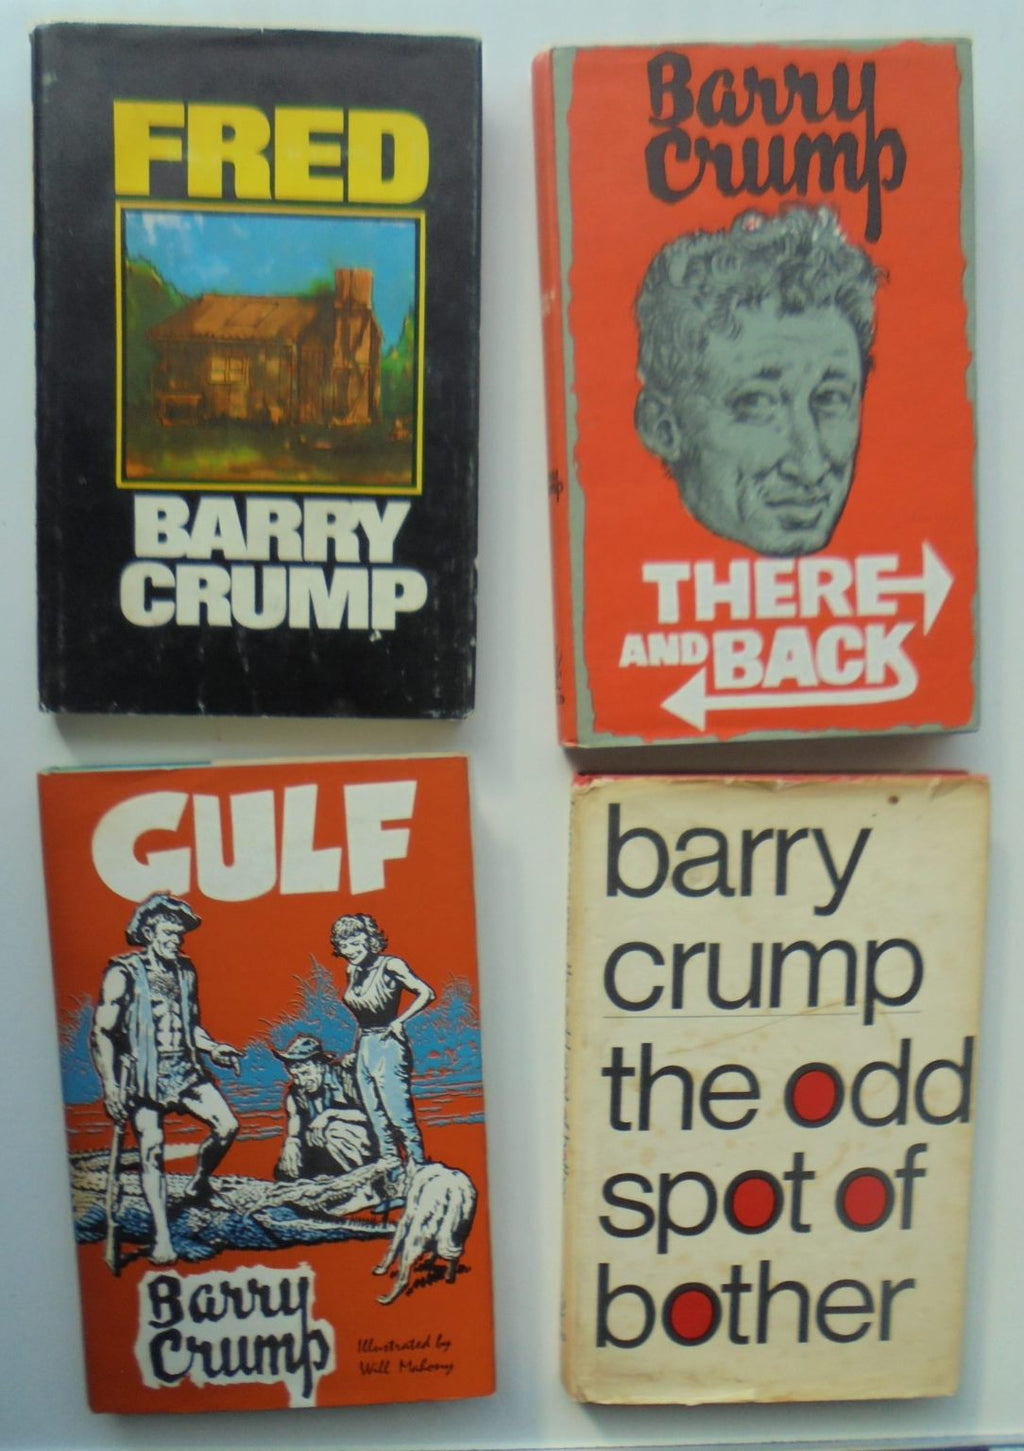 Barry Crump. 4 Hardback 1st editions. There & Back, Gulf, Fred, The Odd Spot Of Bother